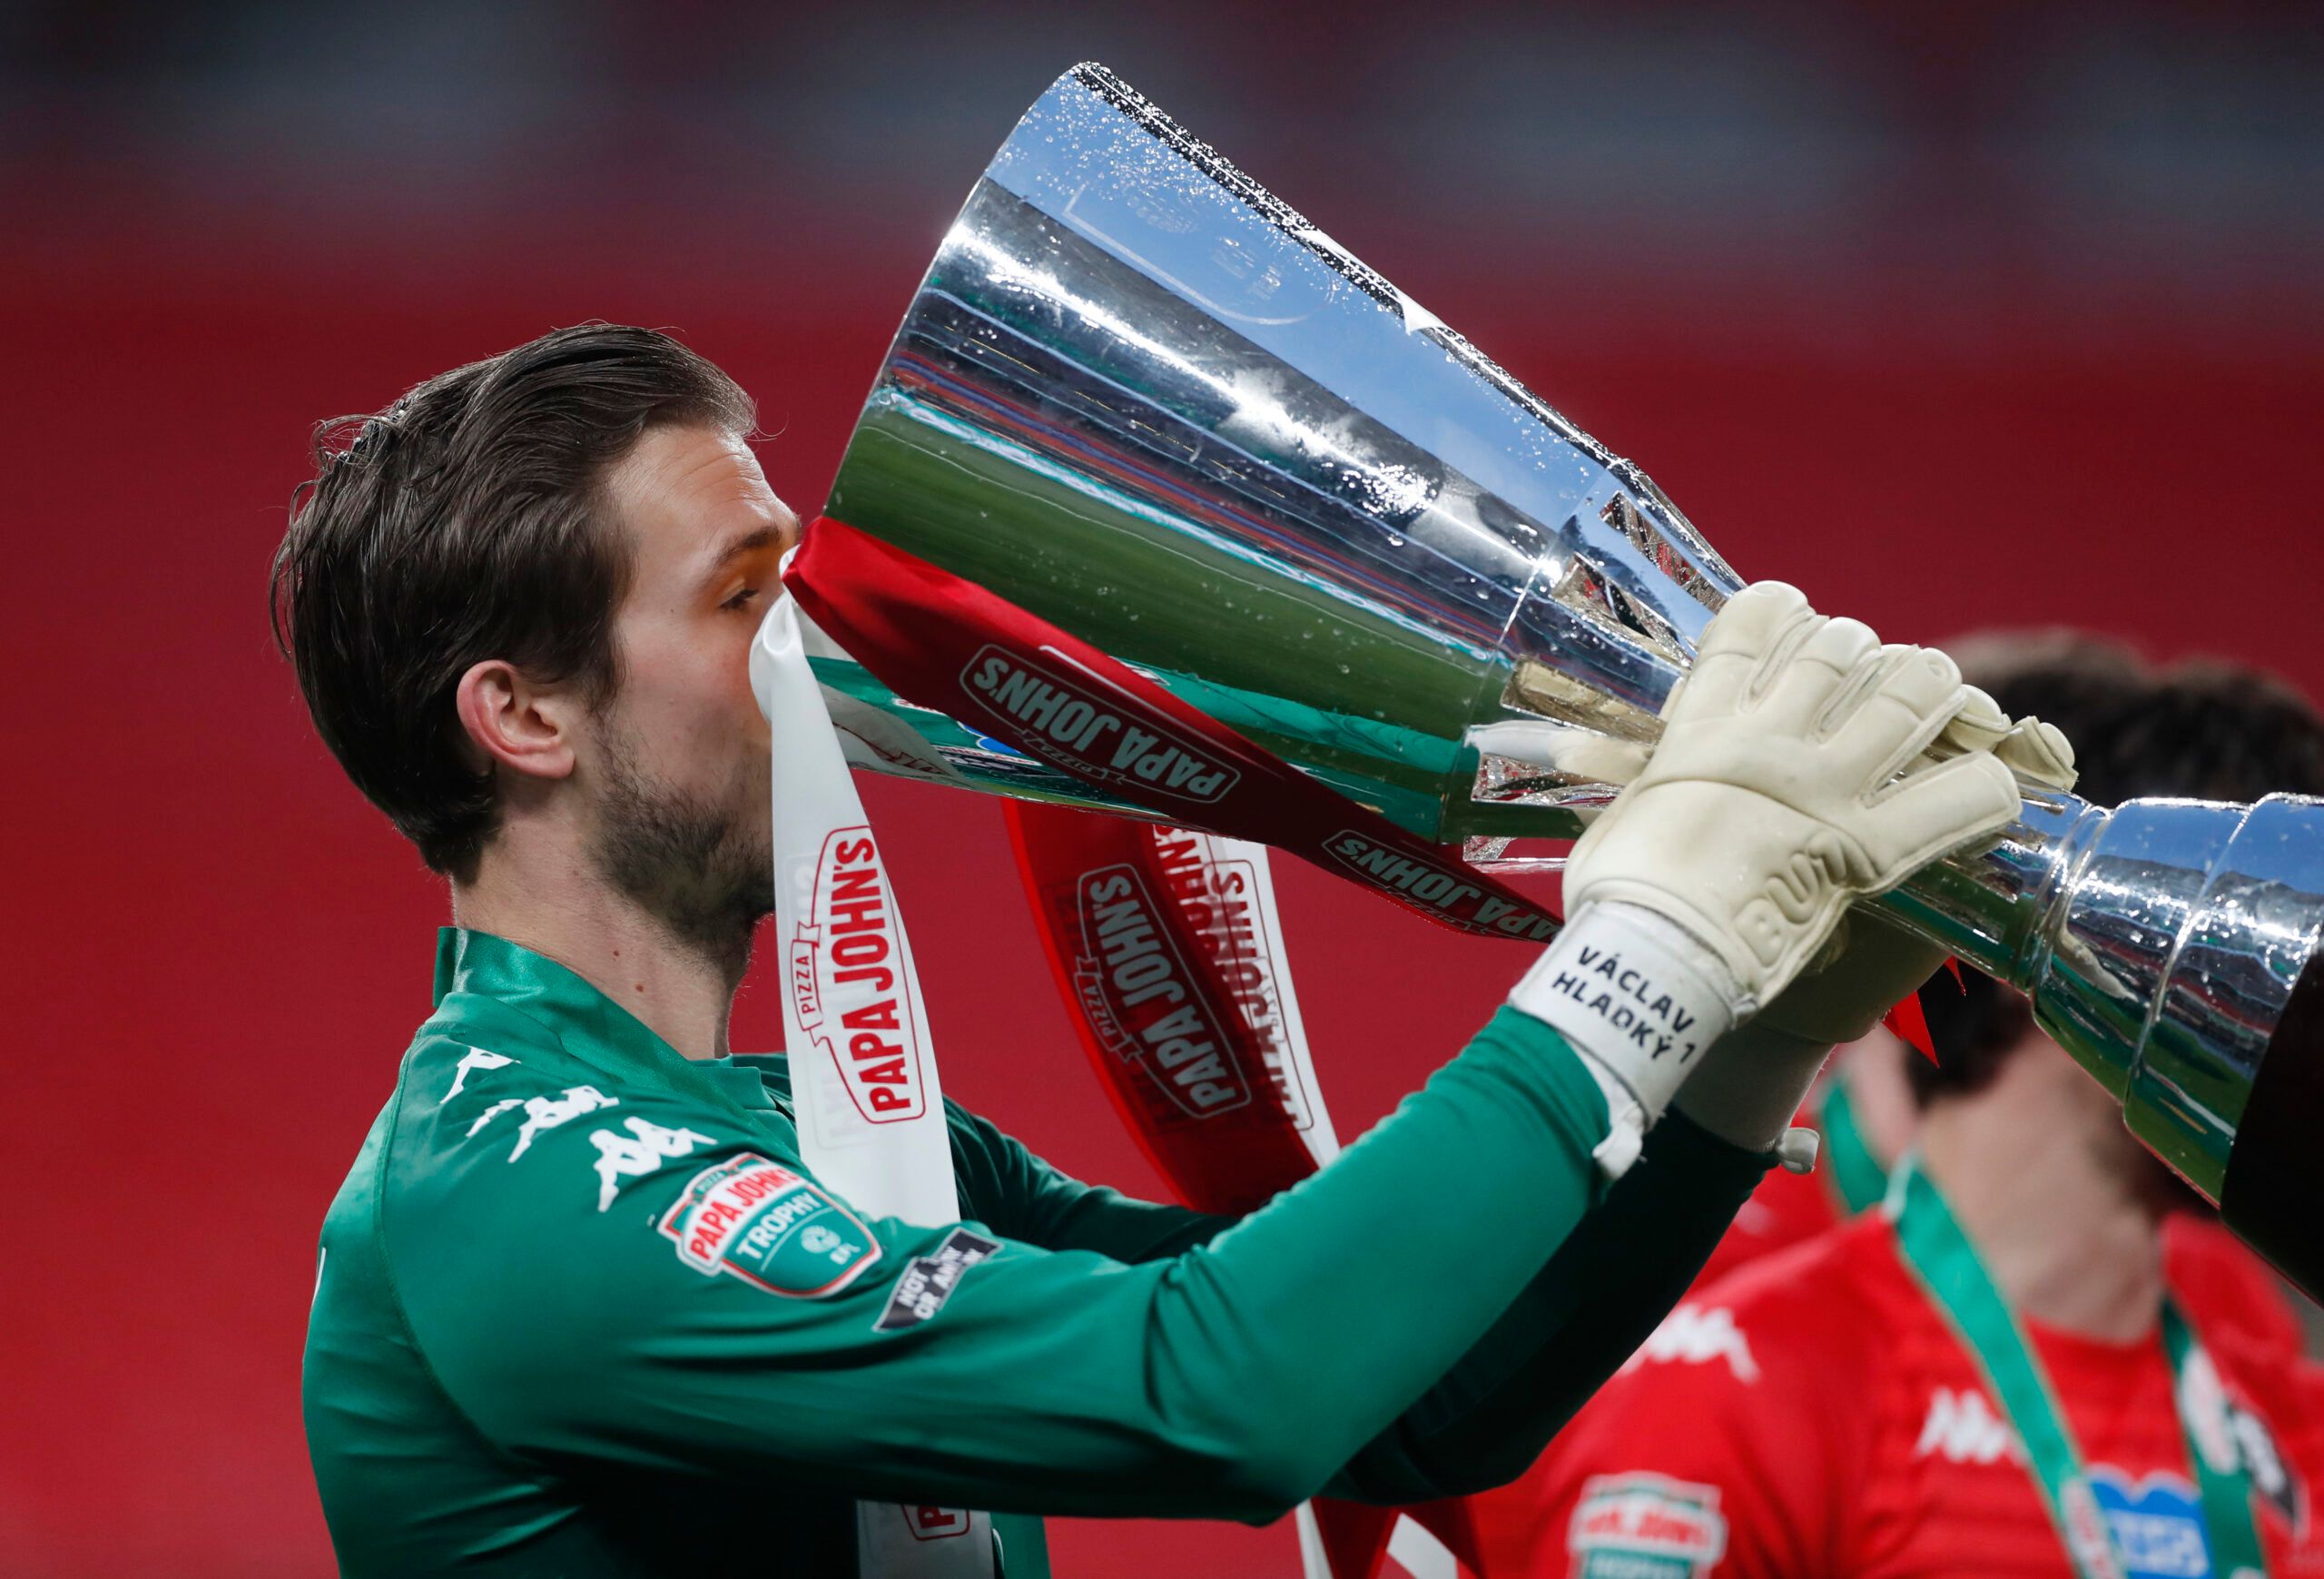 Soccer Football - 2019/20 EFL Trophy Final - Portsmouth v Salford City - Wembley Stadium, London, Britain - March 13, 2021 Salford's Vaclav Hladky celebrates with the trophy Action Images/Matthew Childs EDITORIAL USE ONLY. No use with unauthorized audio, video, data, fixture lists, club/league logos or 'live' services. Online in-match use limited to 75 images, no video emulation. No use in betting, games or single club /league/player publications.  Please contact your account representative for 